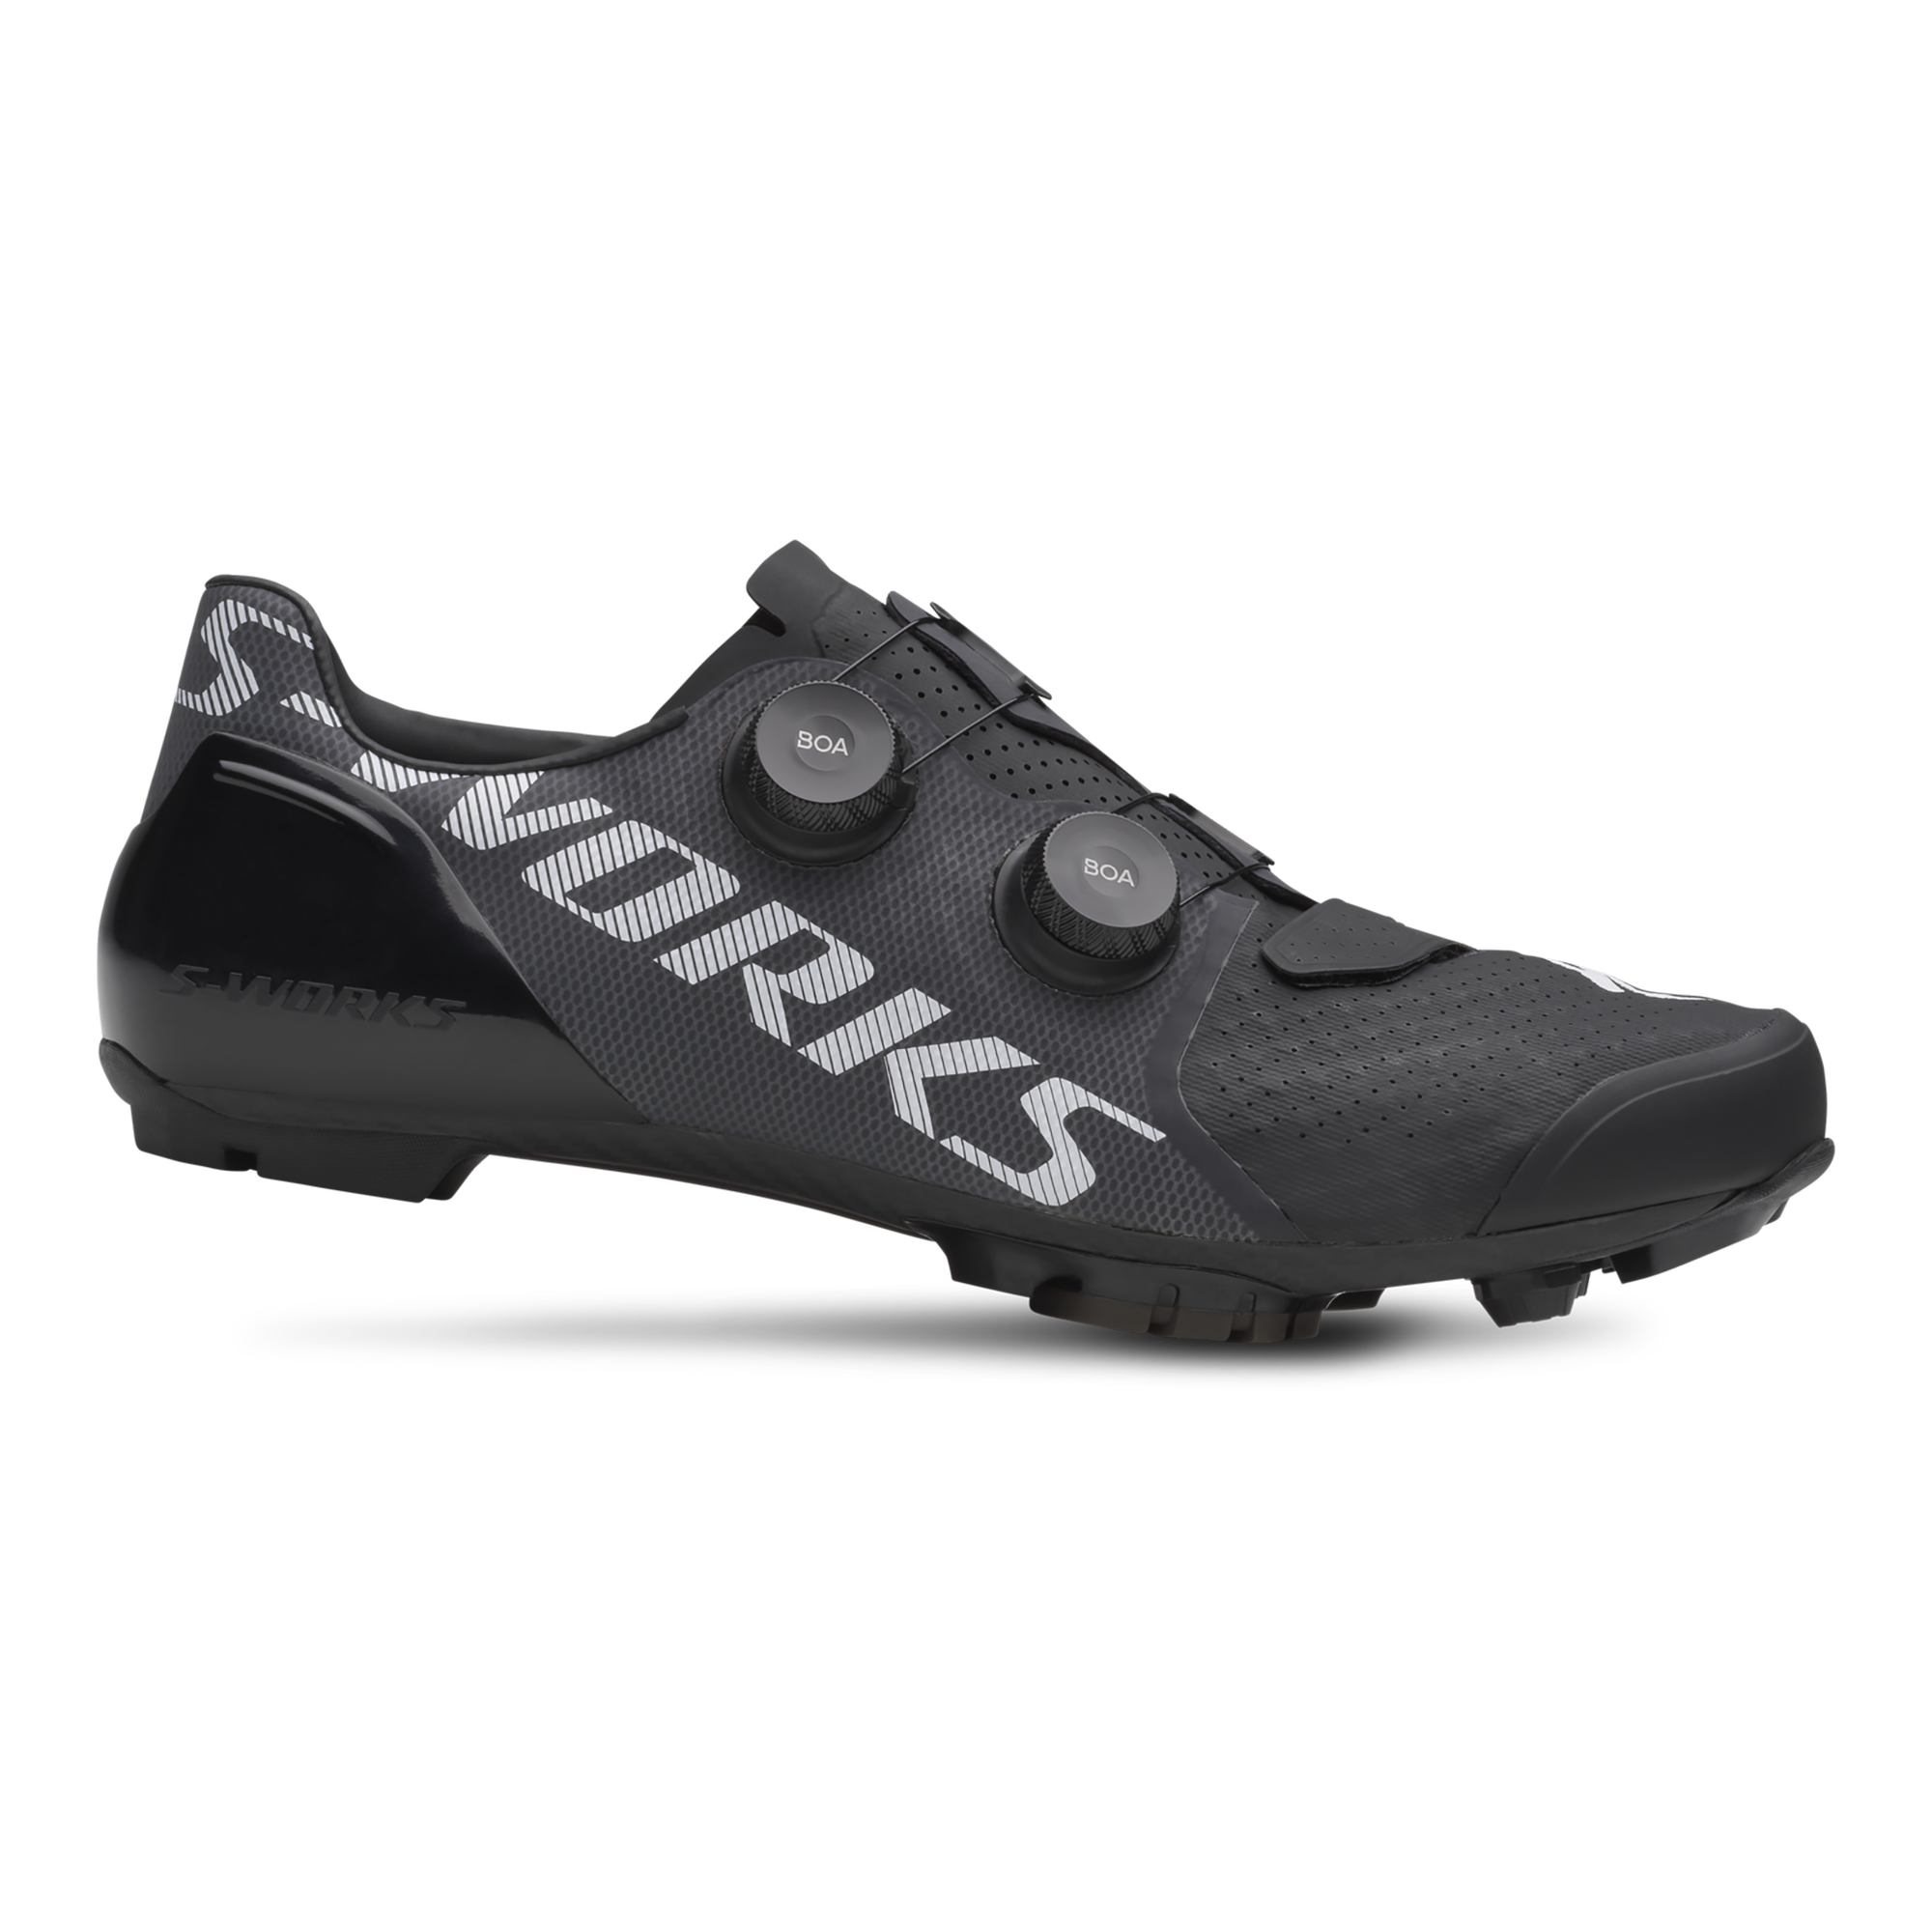 Chaussures VTT S-Works Recon